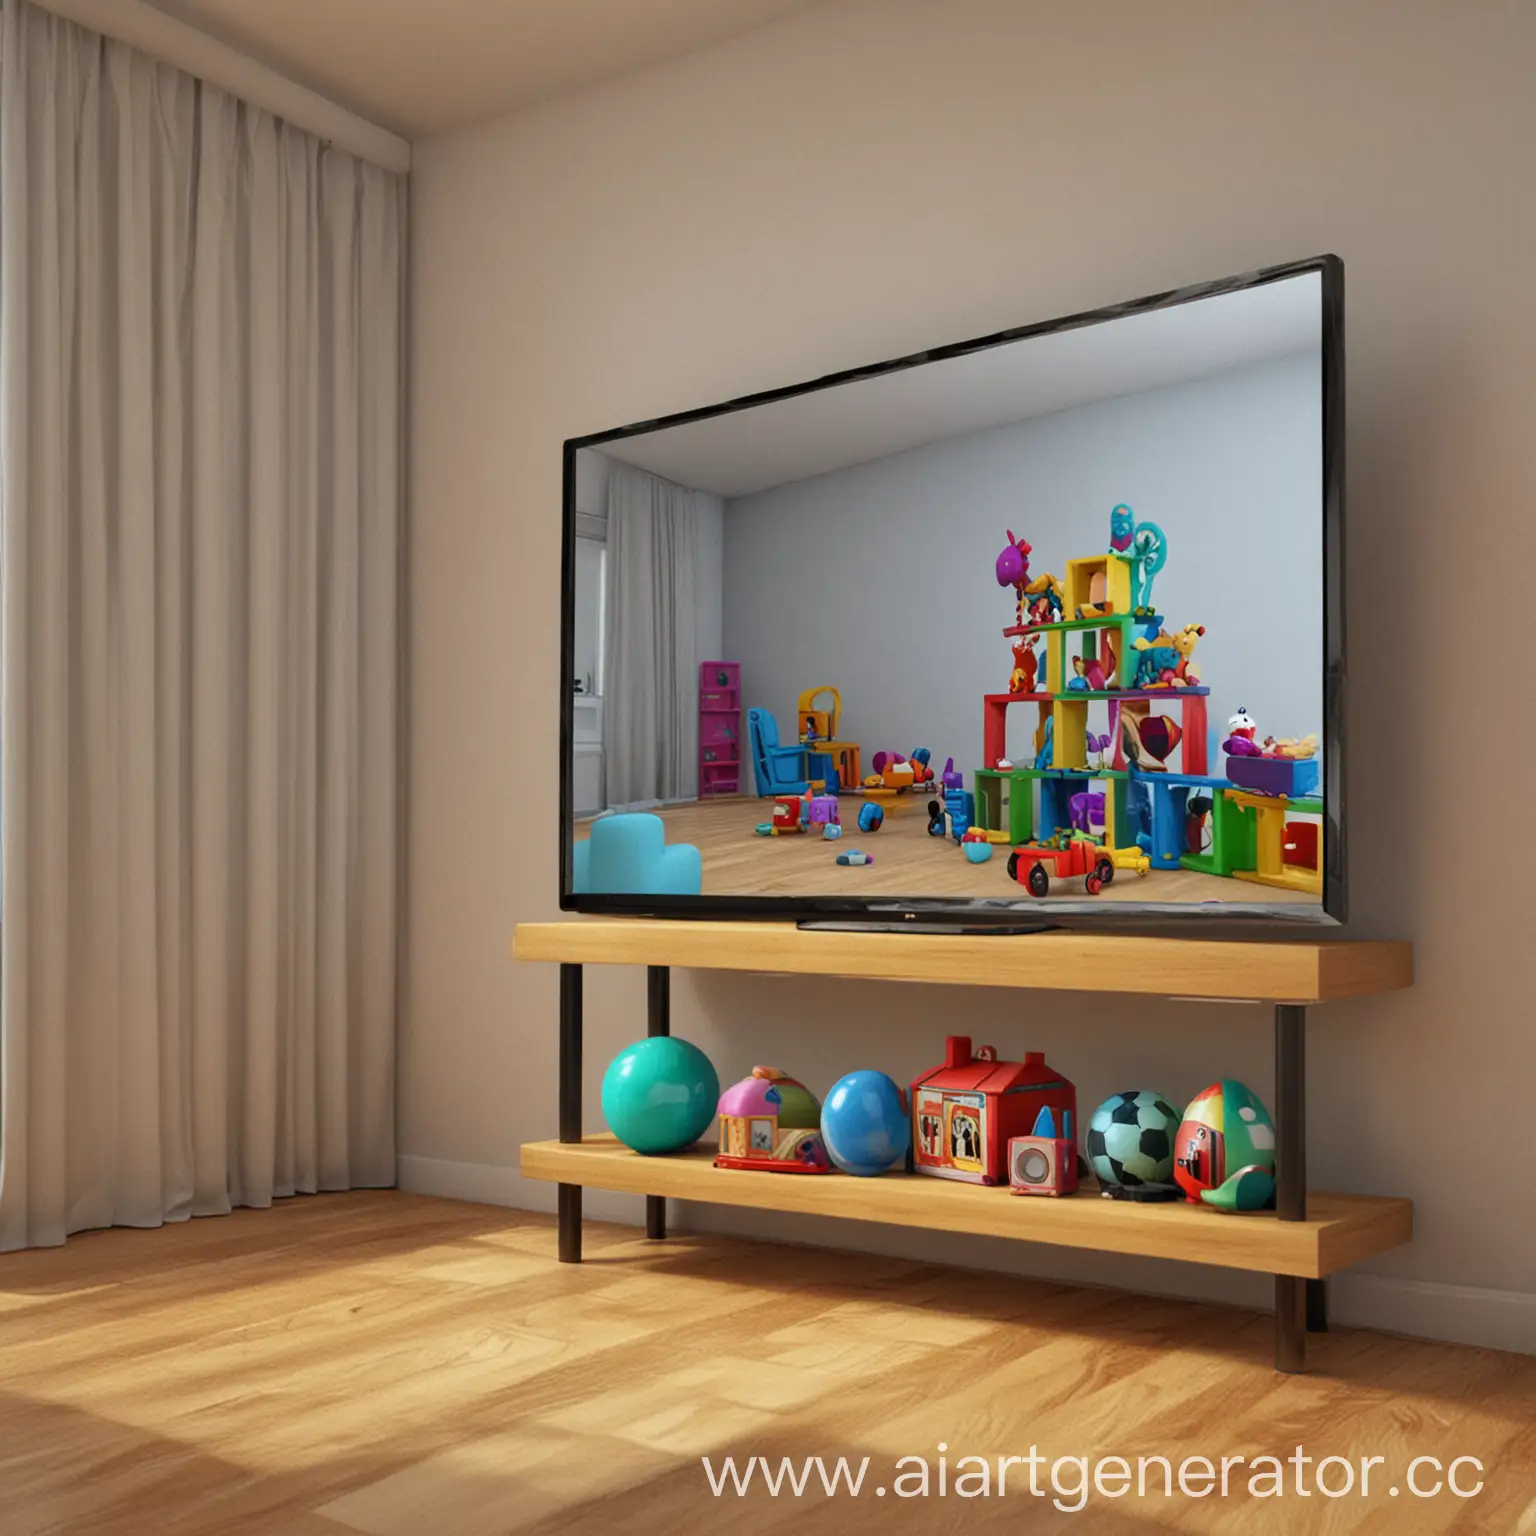 Colorful-Toy-Collection-in-a-Playroom-Setting